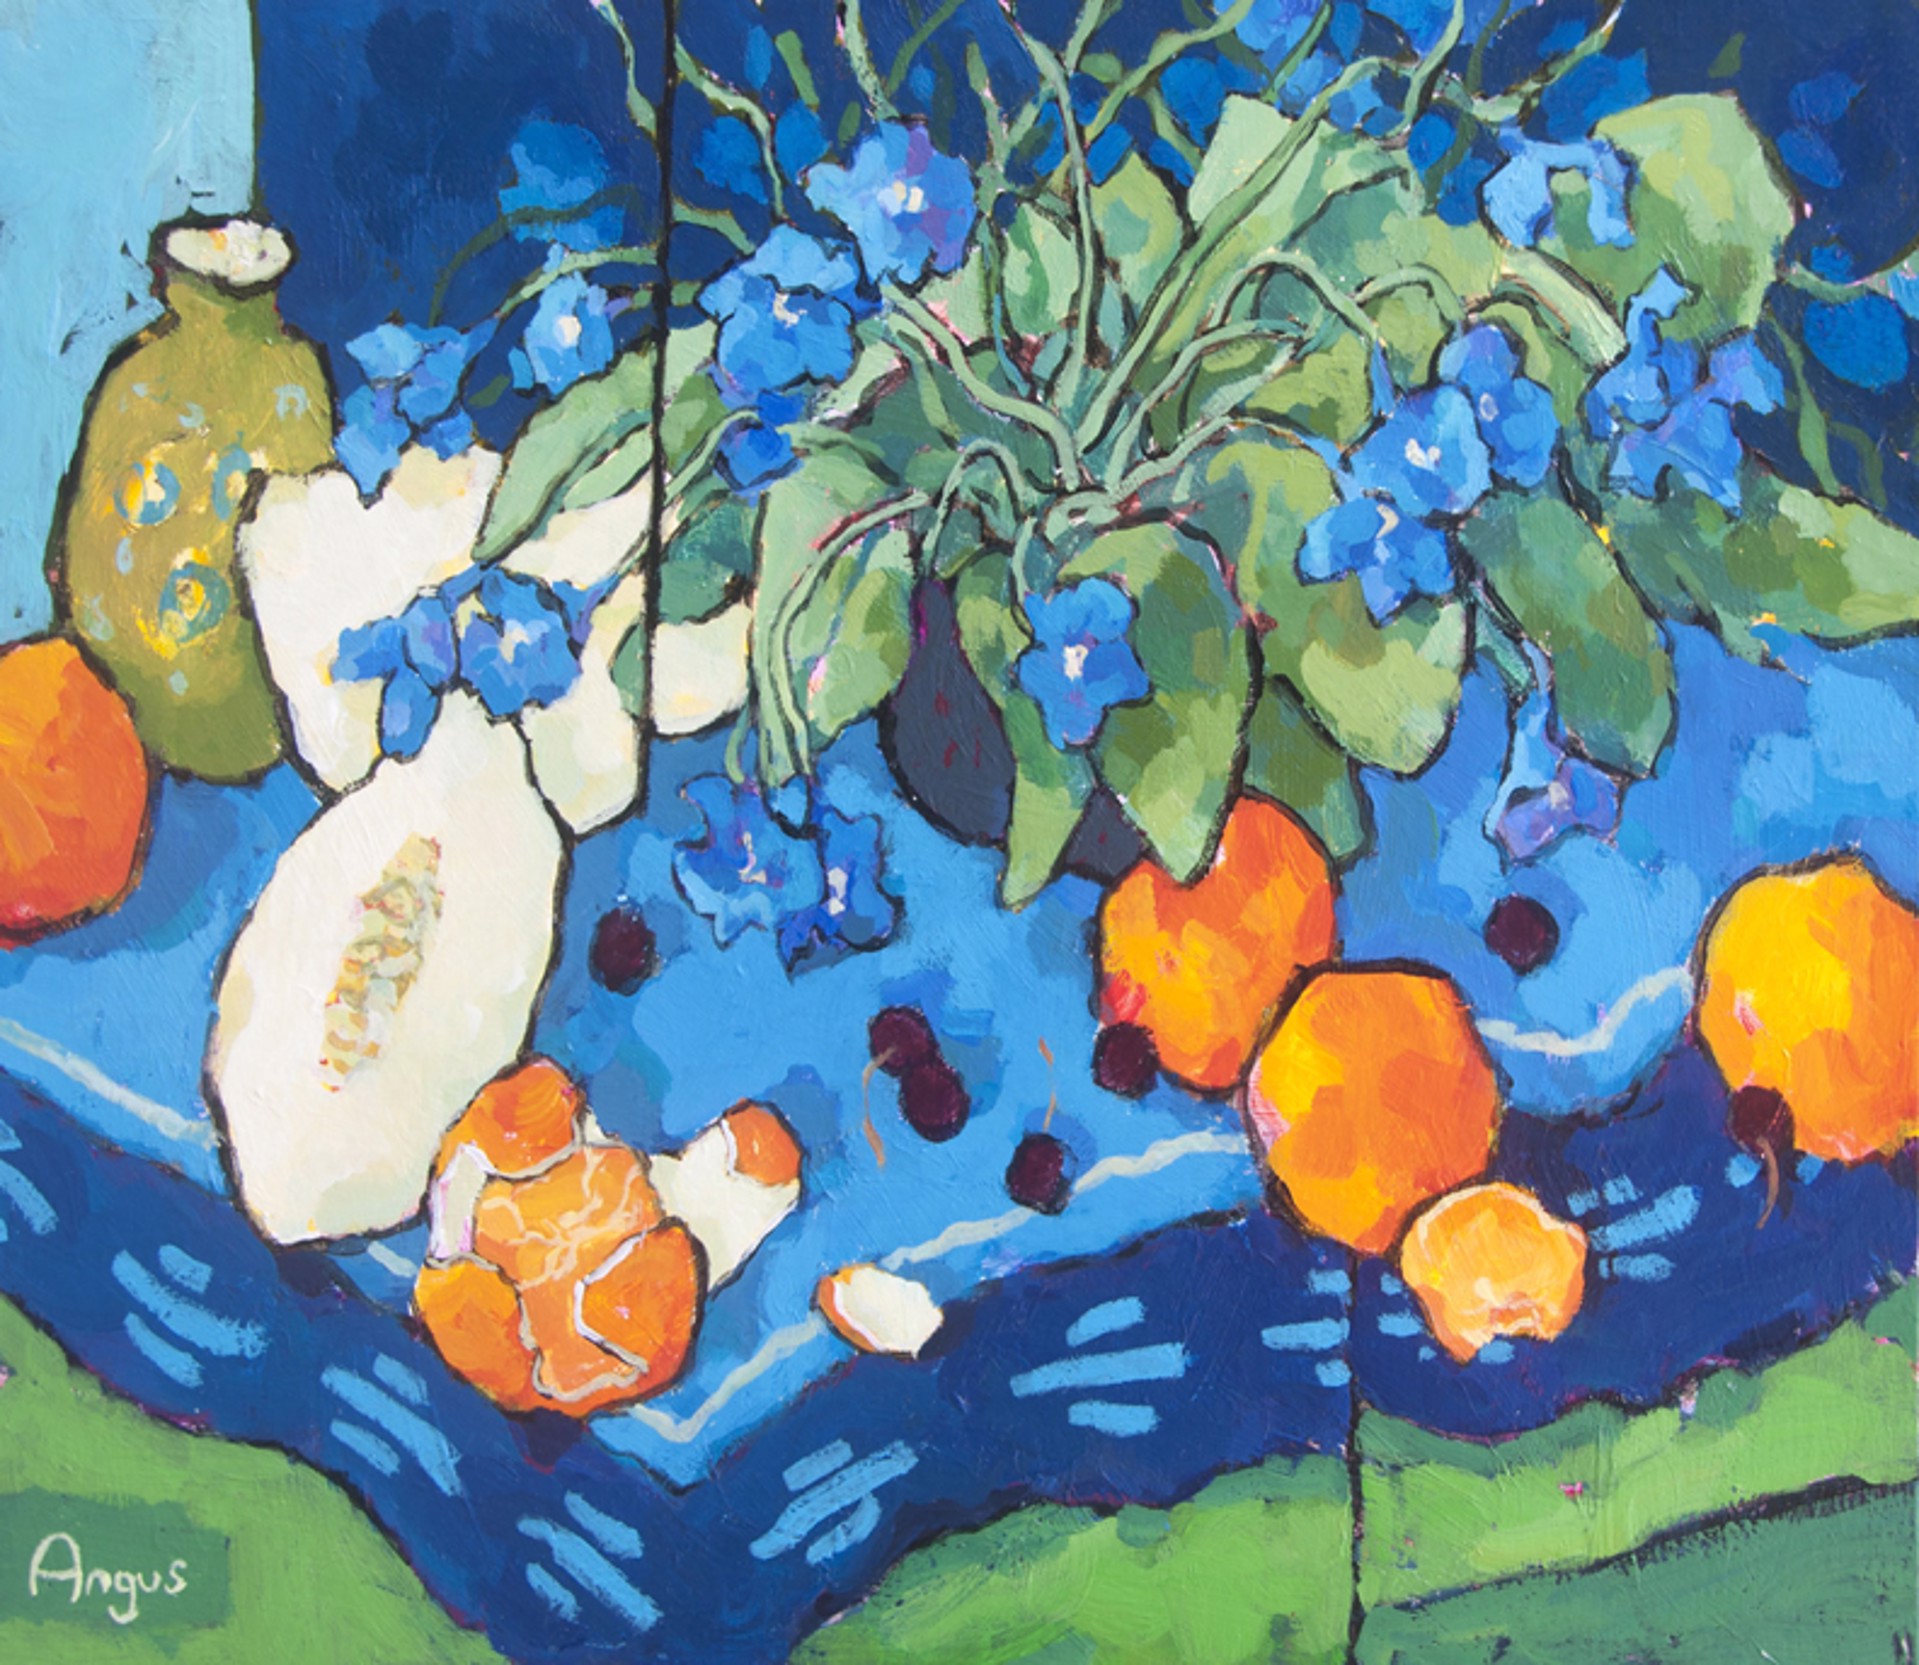 Arrangement of orange and blue by Angus